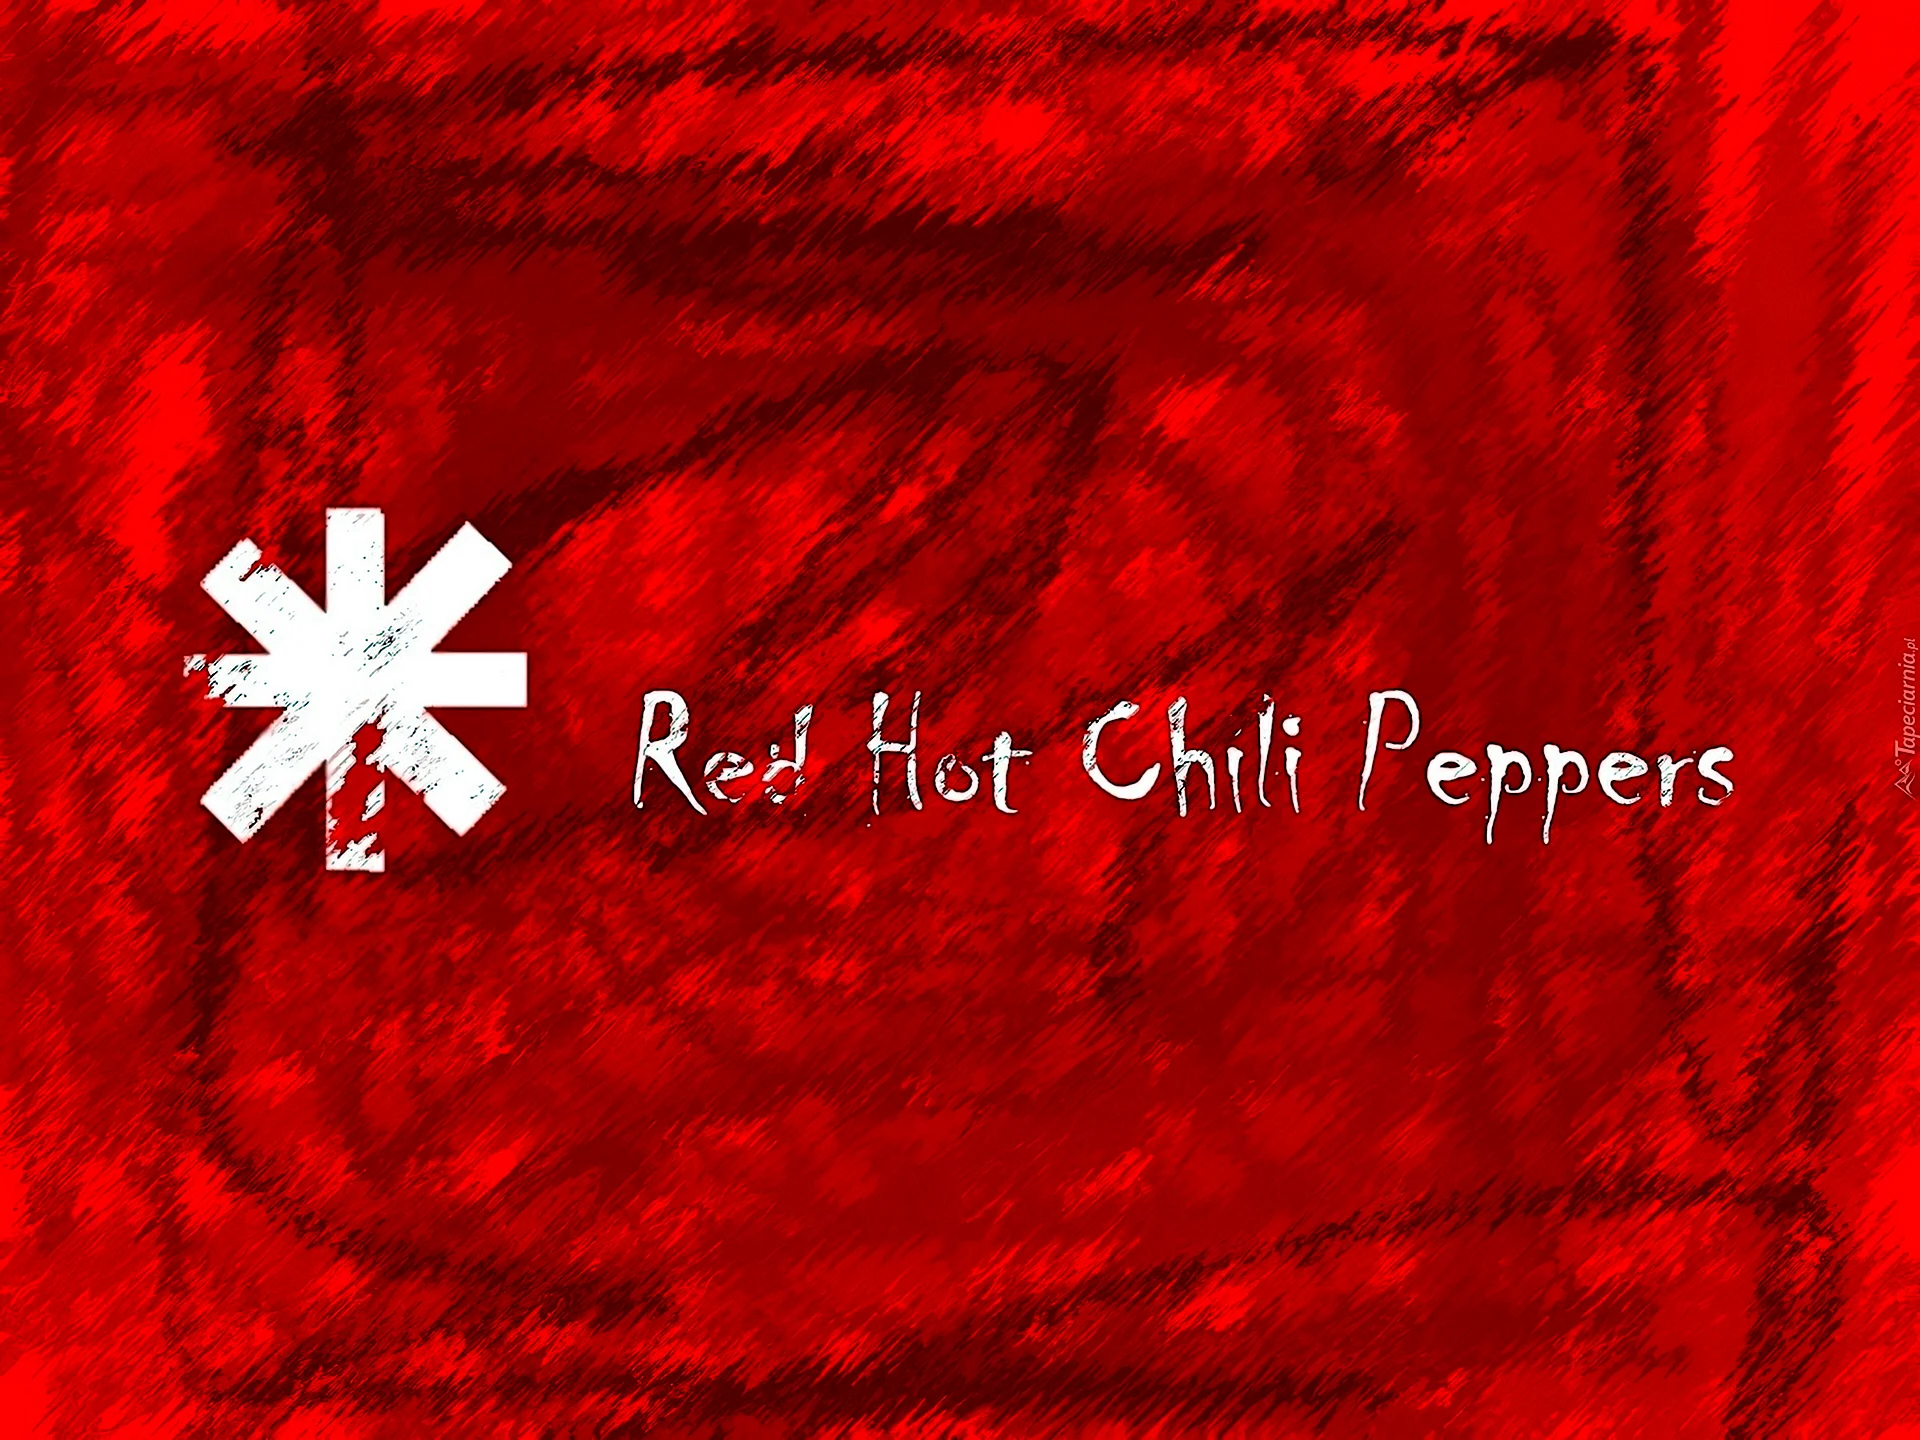 Red Hot Chili Peppers Band Logo Wallpaper